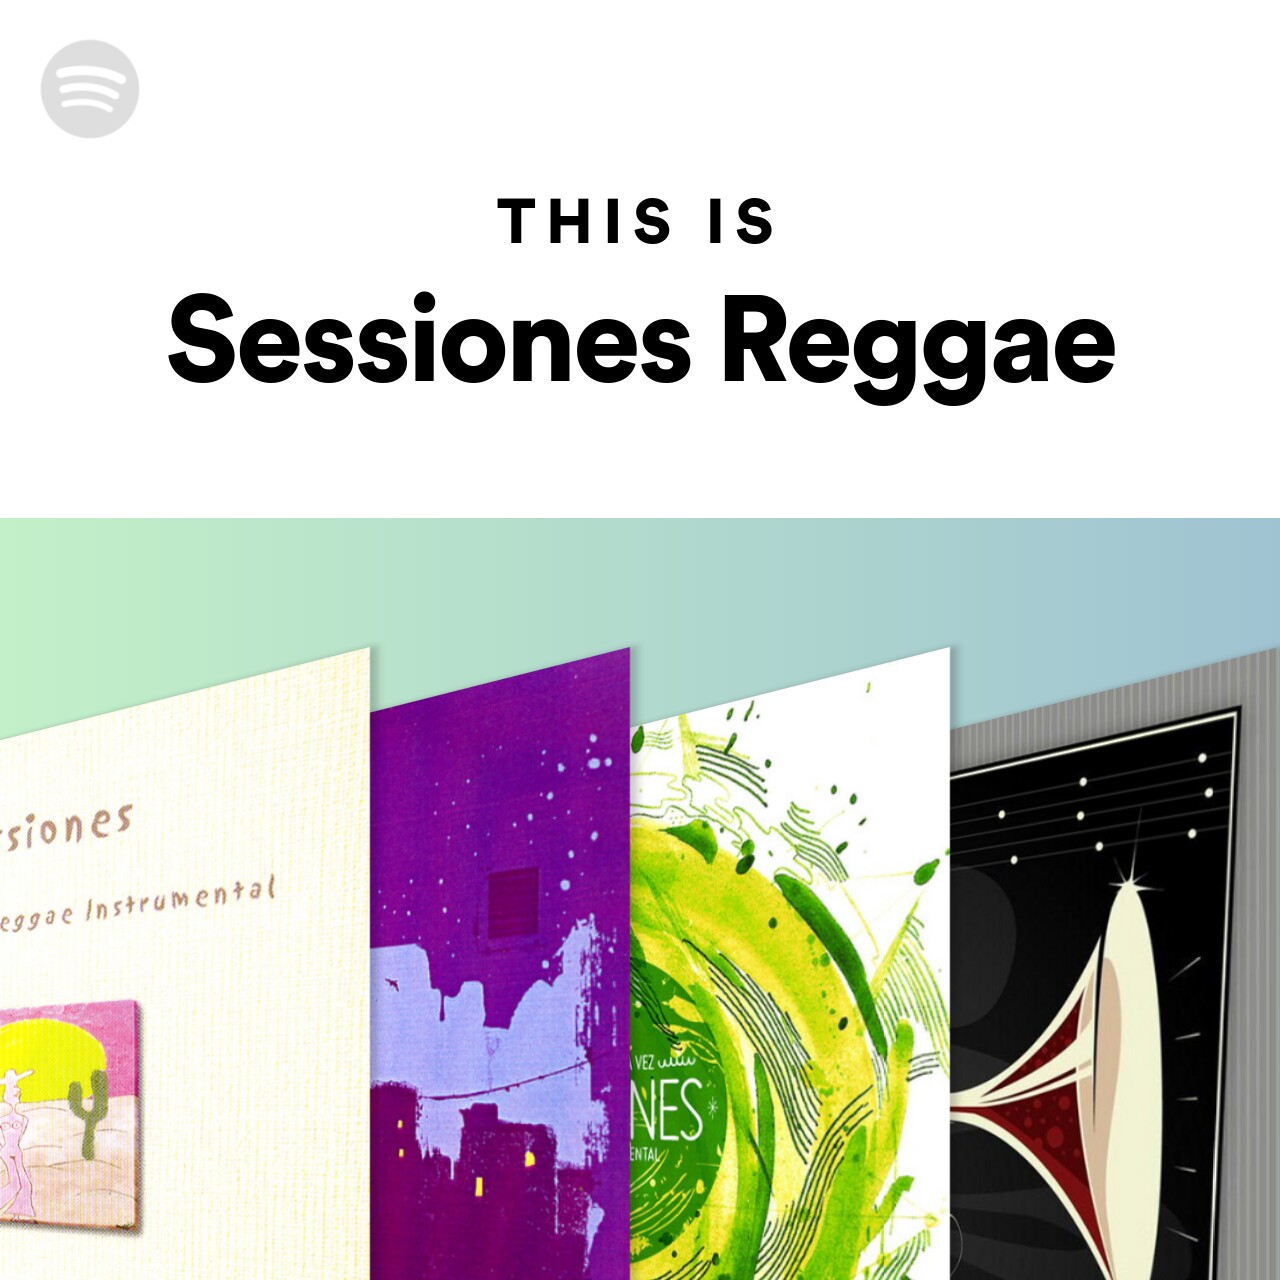 This Is Sessiones Reggae Spotify Playlist